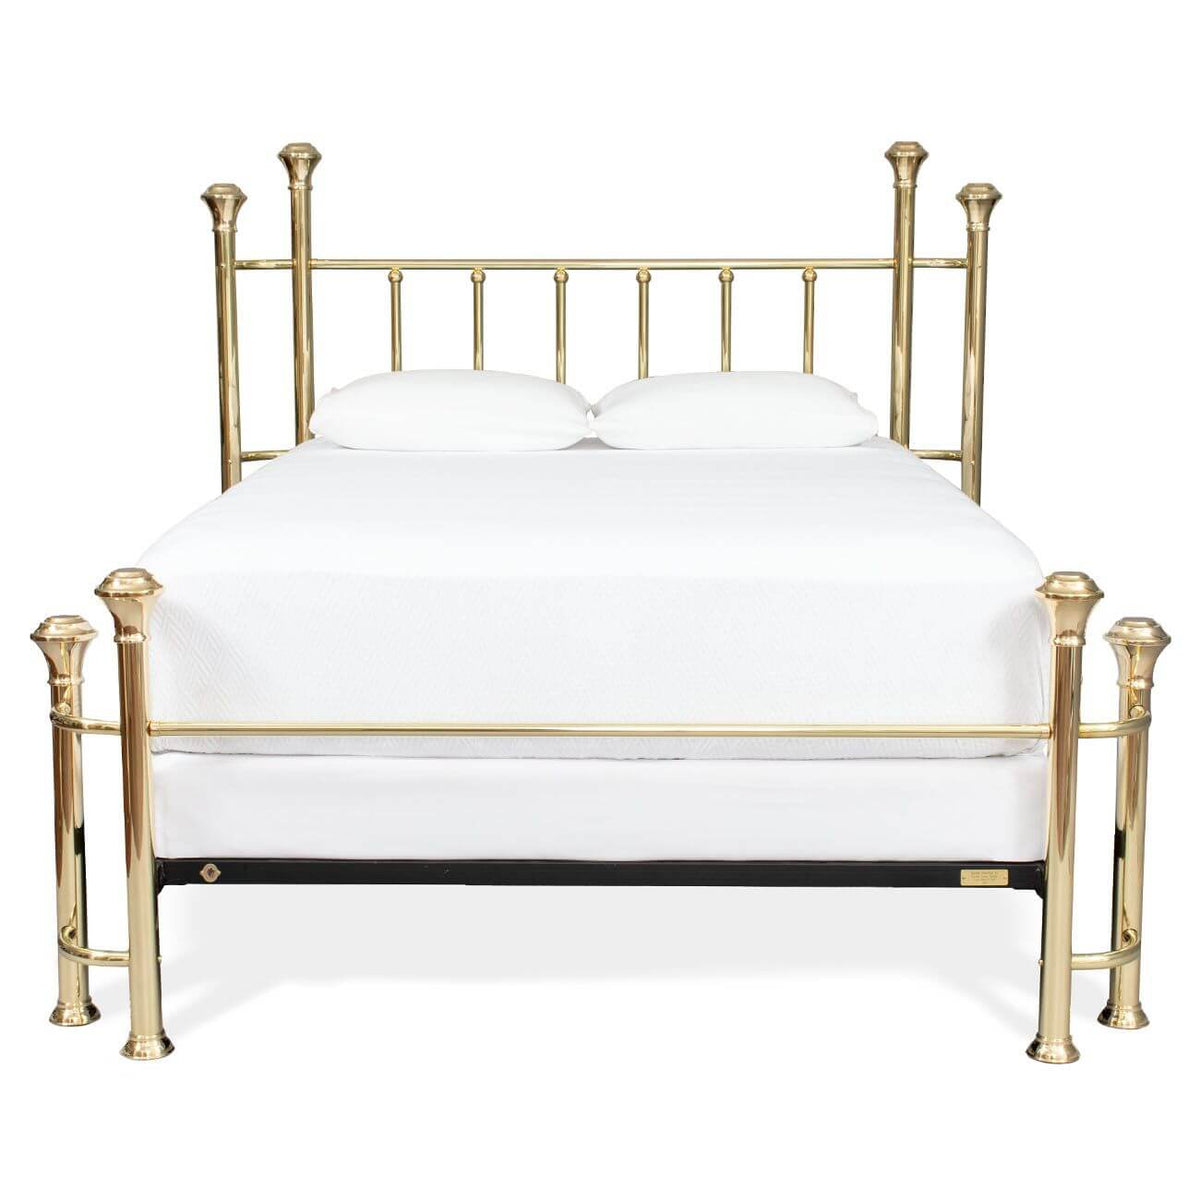 Brass Bed Photos, Download The BEST Free Brass Bed Stock Photos & HD Images